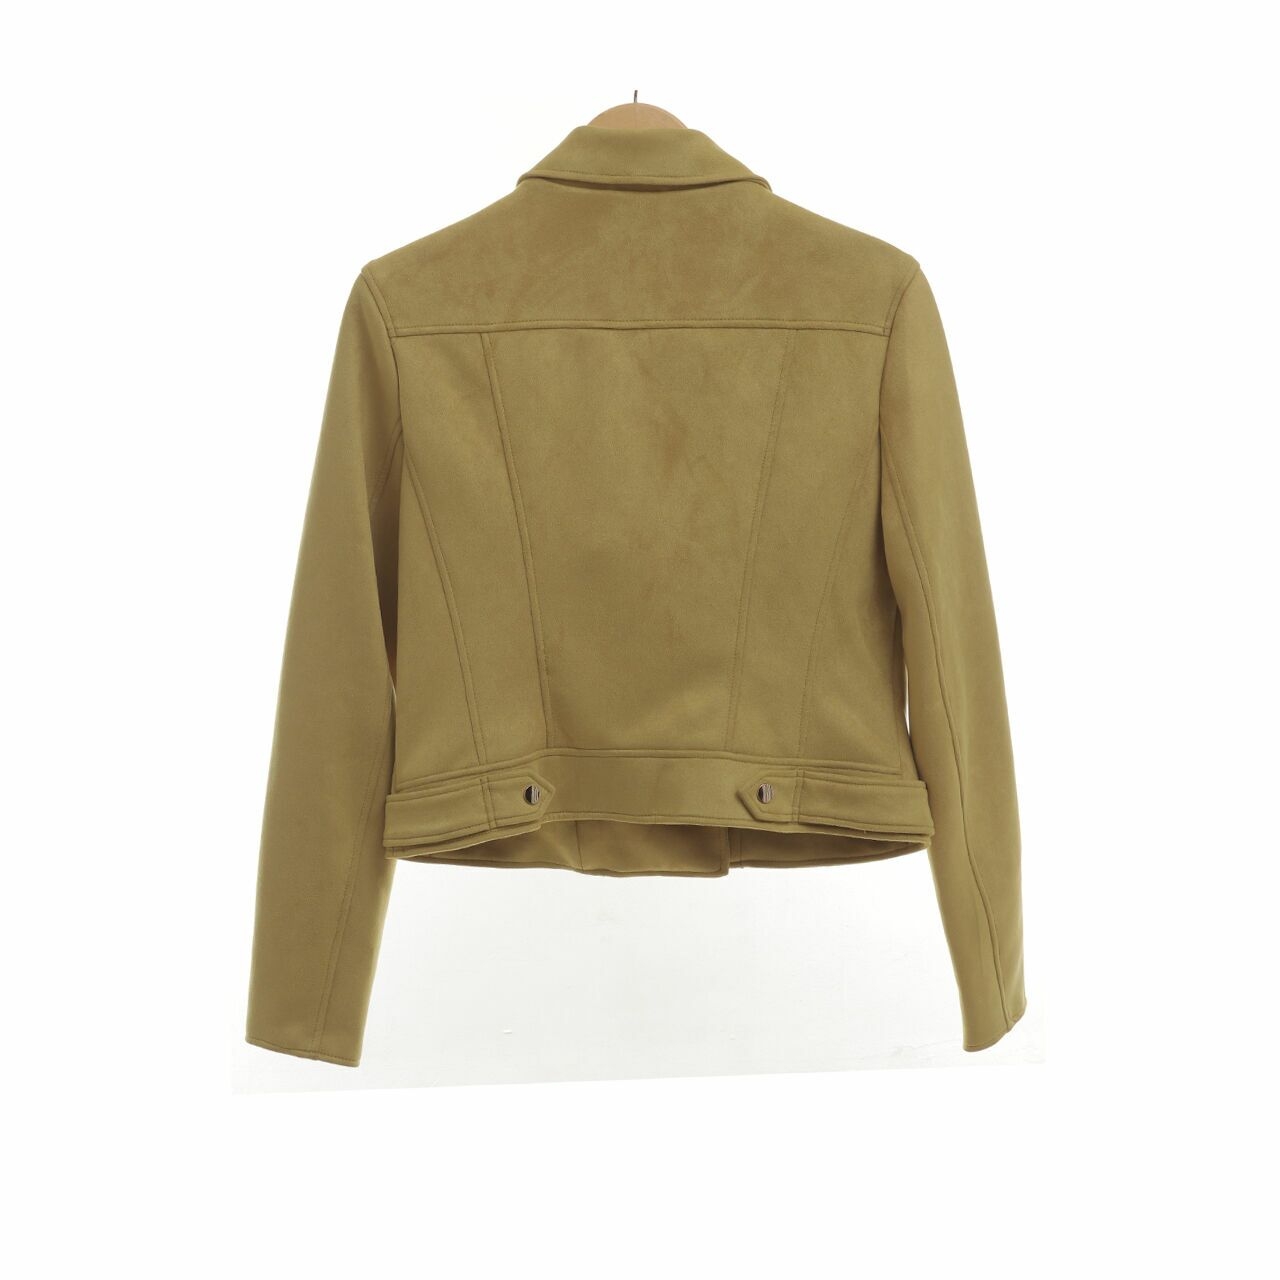 River Island Lime Suede Jacket